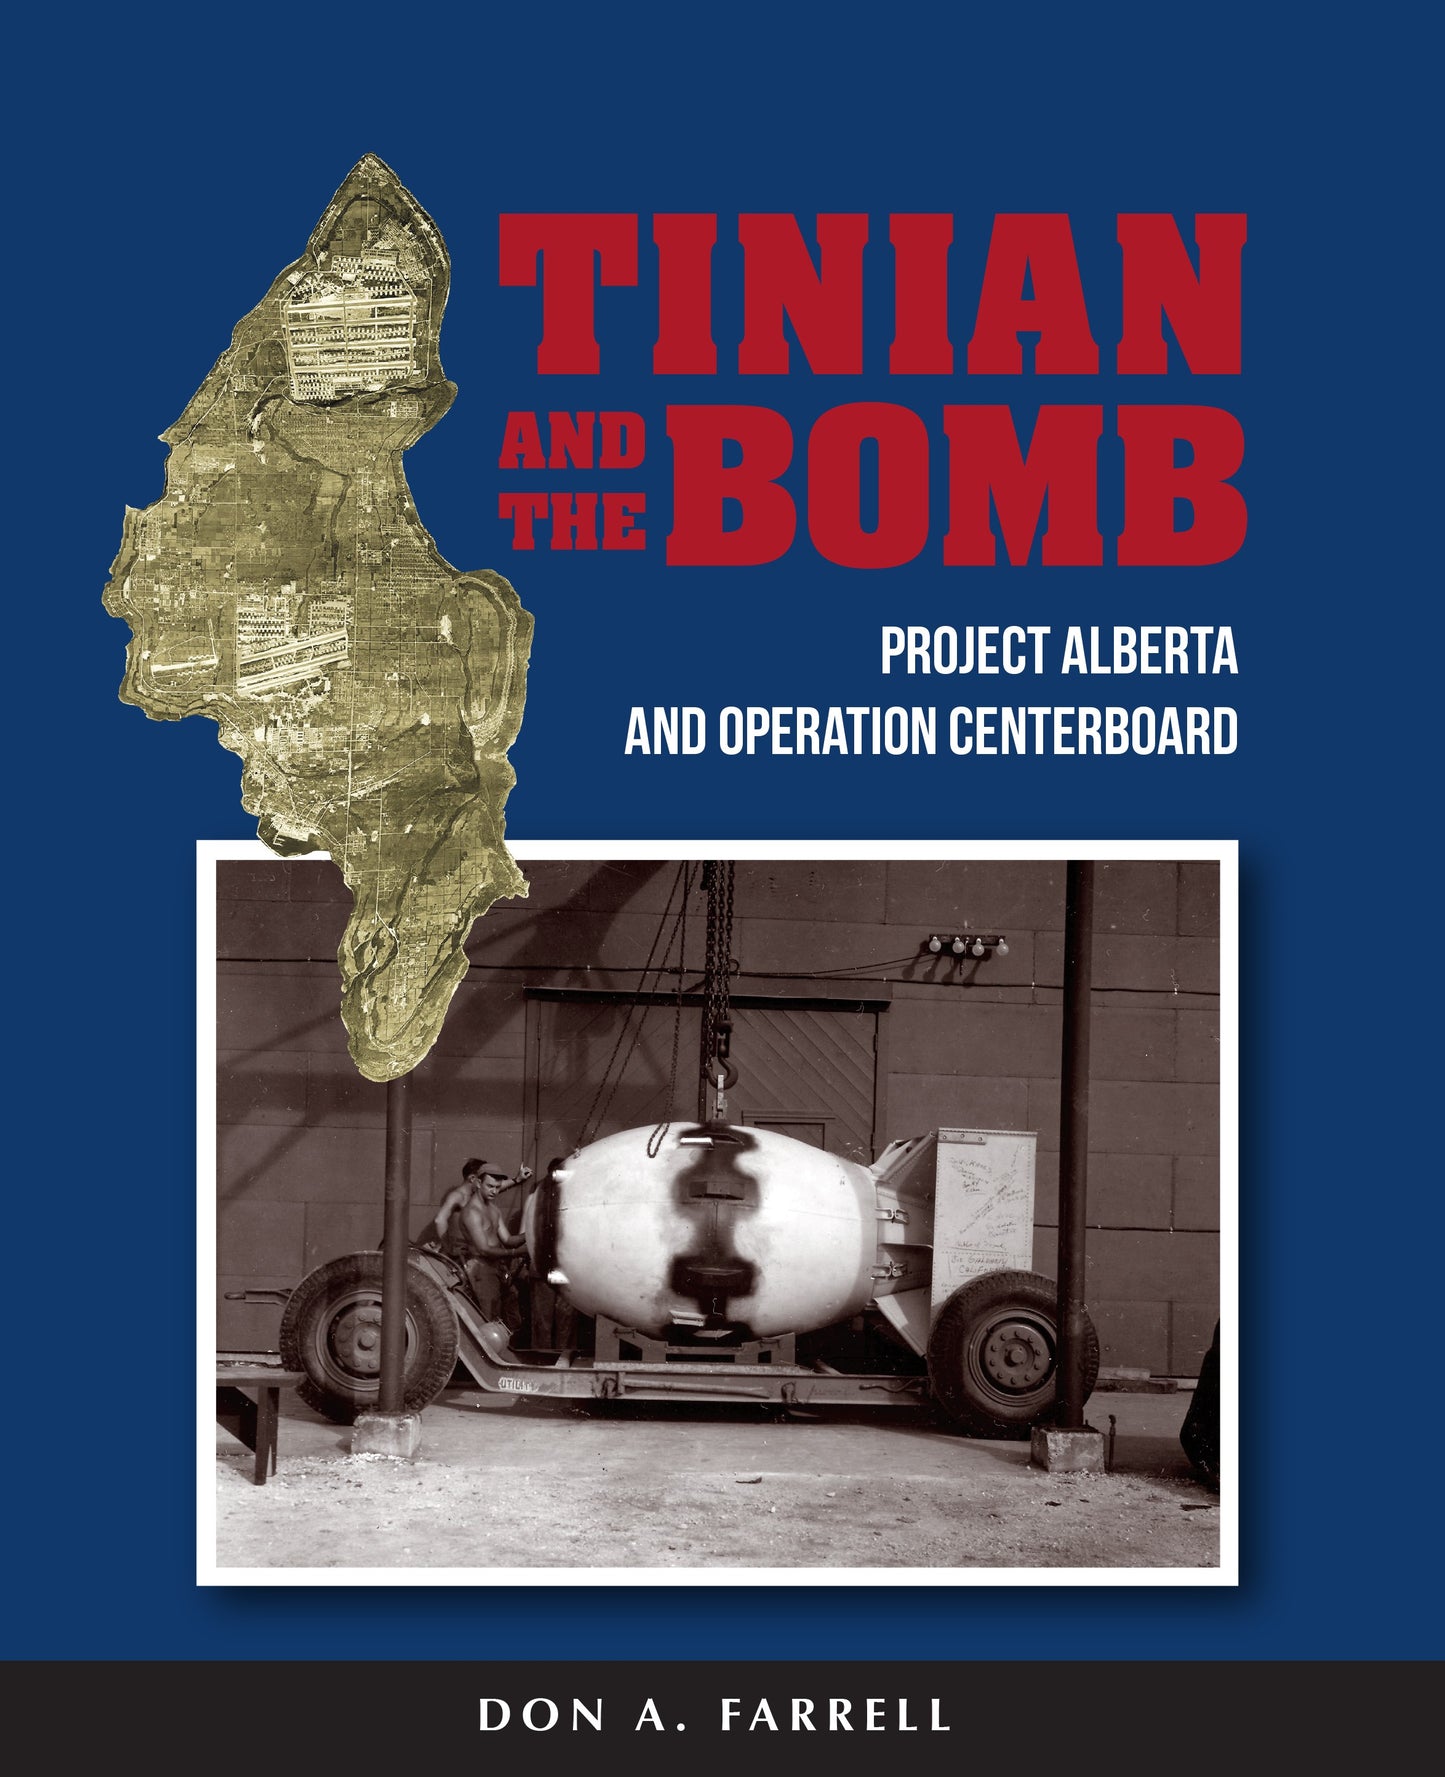 Tinian and the Bomb: Project Alberta and Operation Centerboard